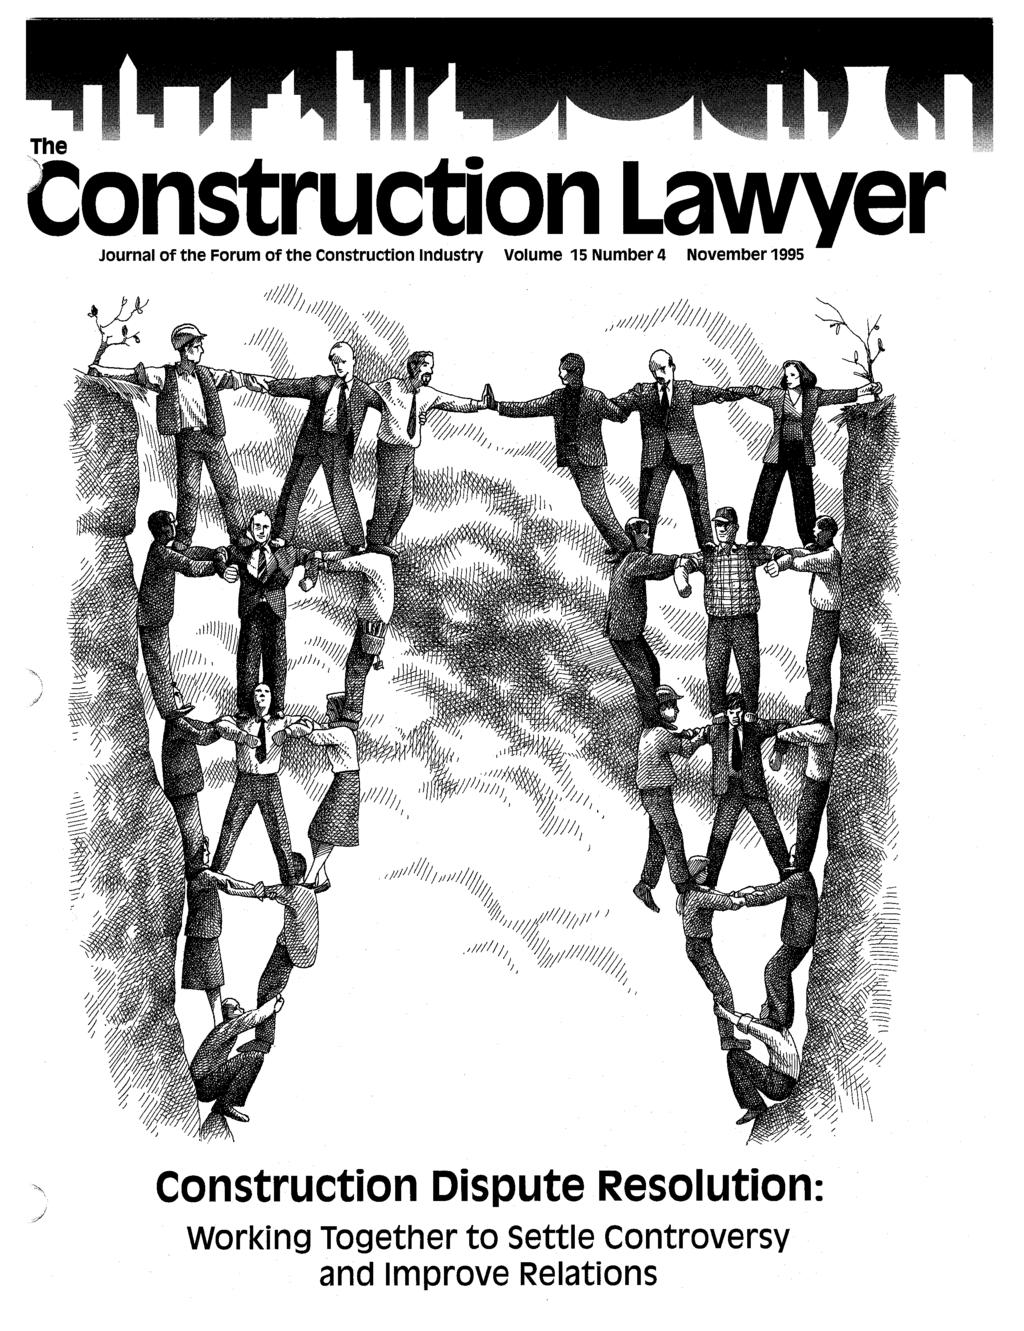 The construction Lawyer Journal of the Forum of the Construction Industry Volume 15 Number 4 November 1995 "//// y,"/j, Iln.